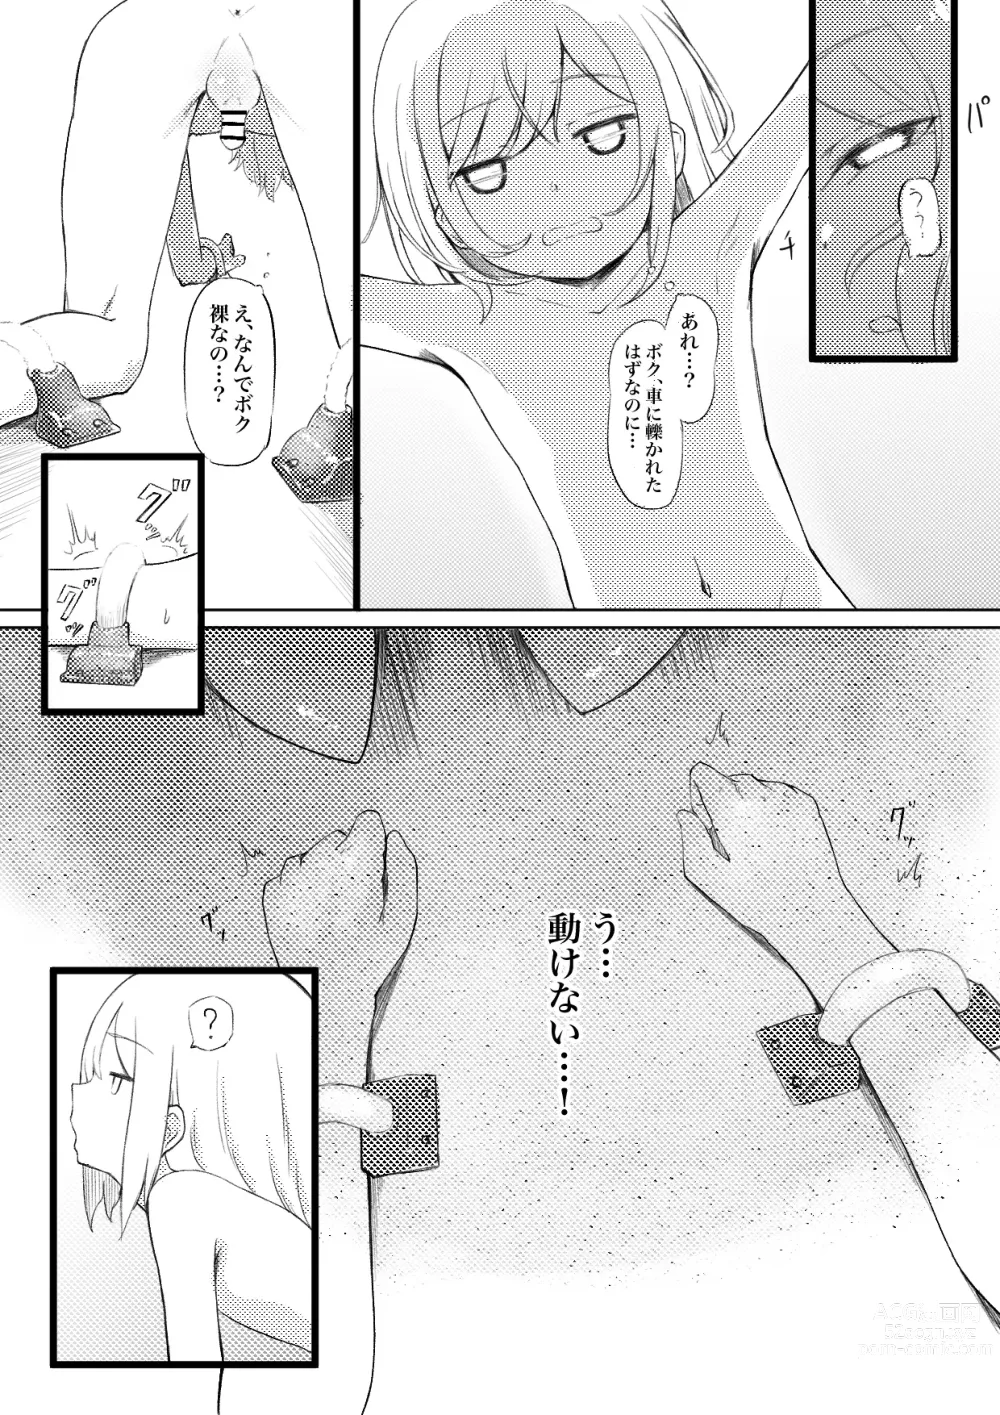 Page 3 of doujinshi permission